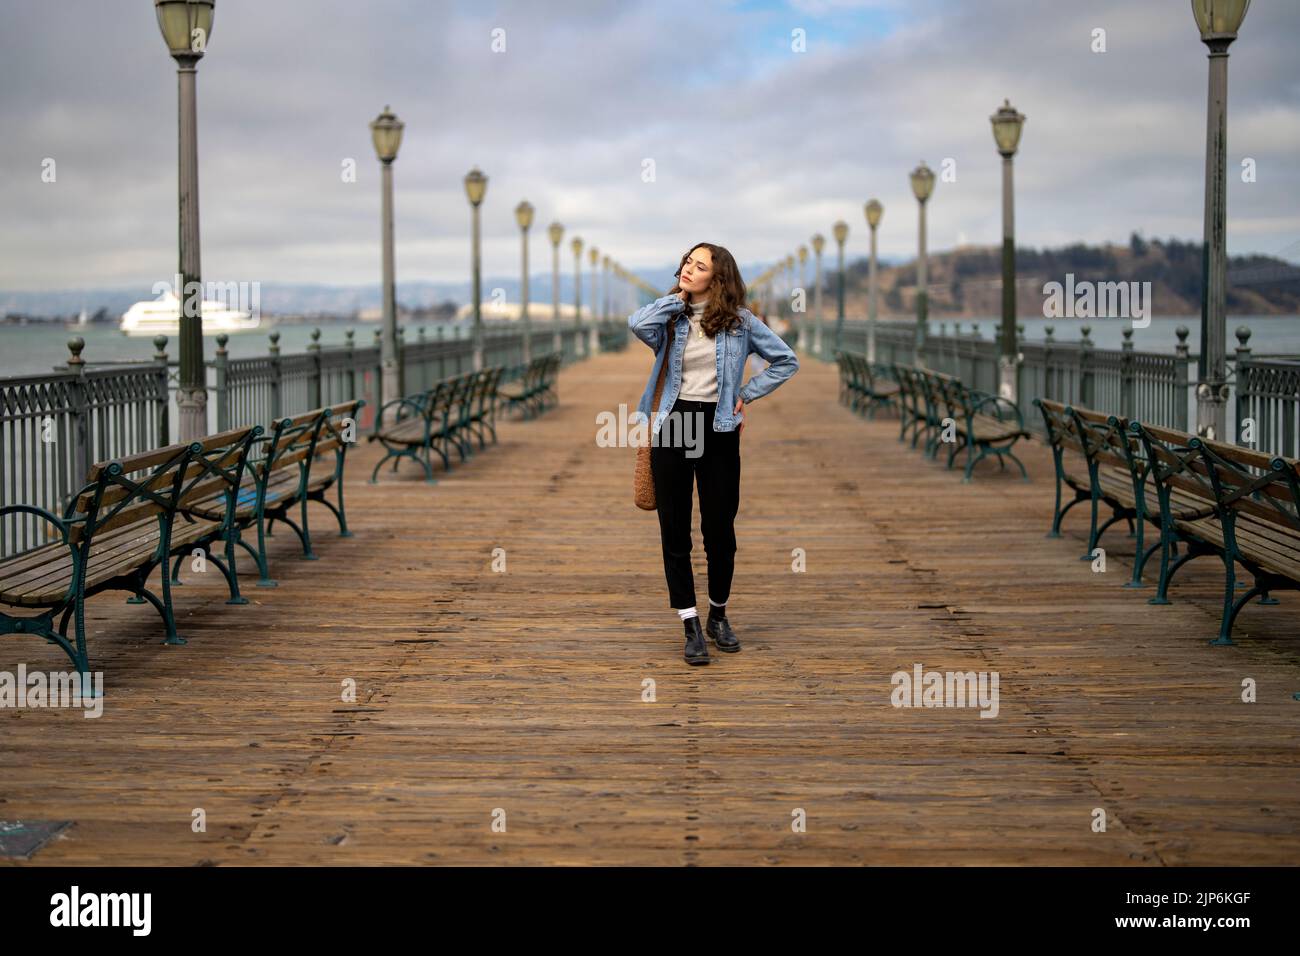 Unposed Portrait of Young Woman on Pier 7 Walking Towards Camera with San Francisco Bay in the Background Stock Photo